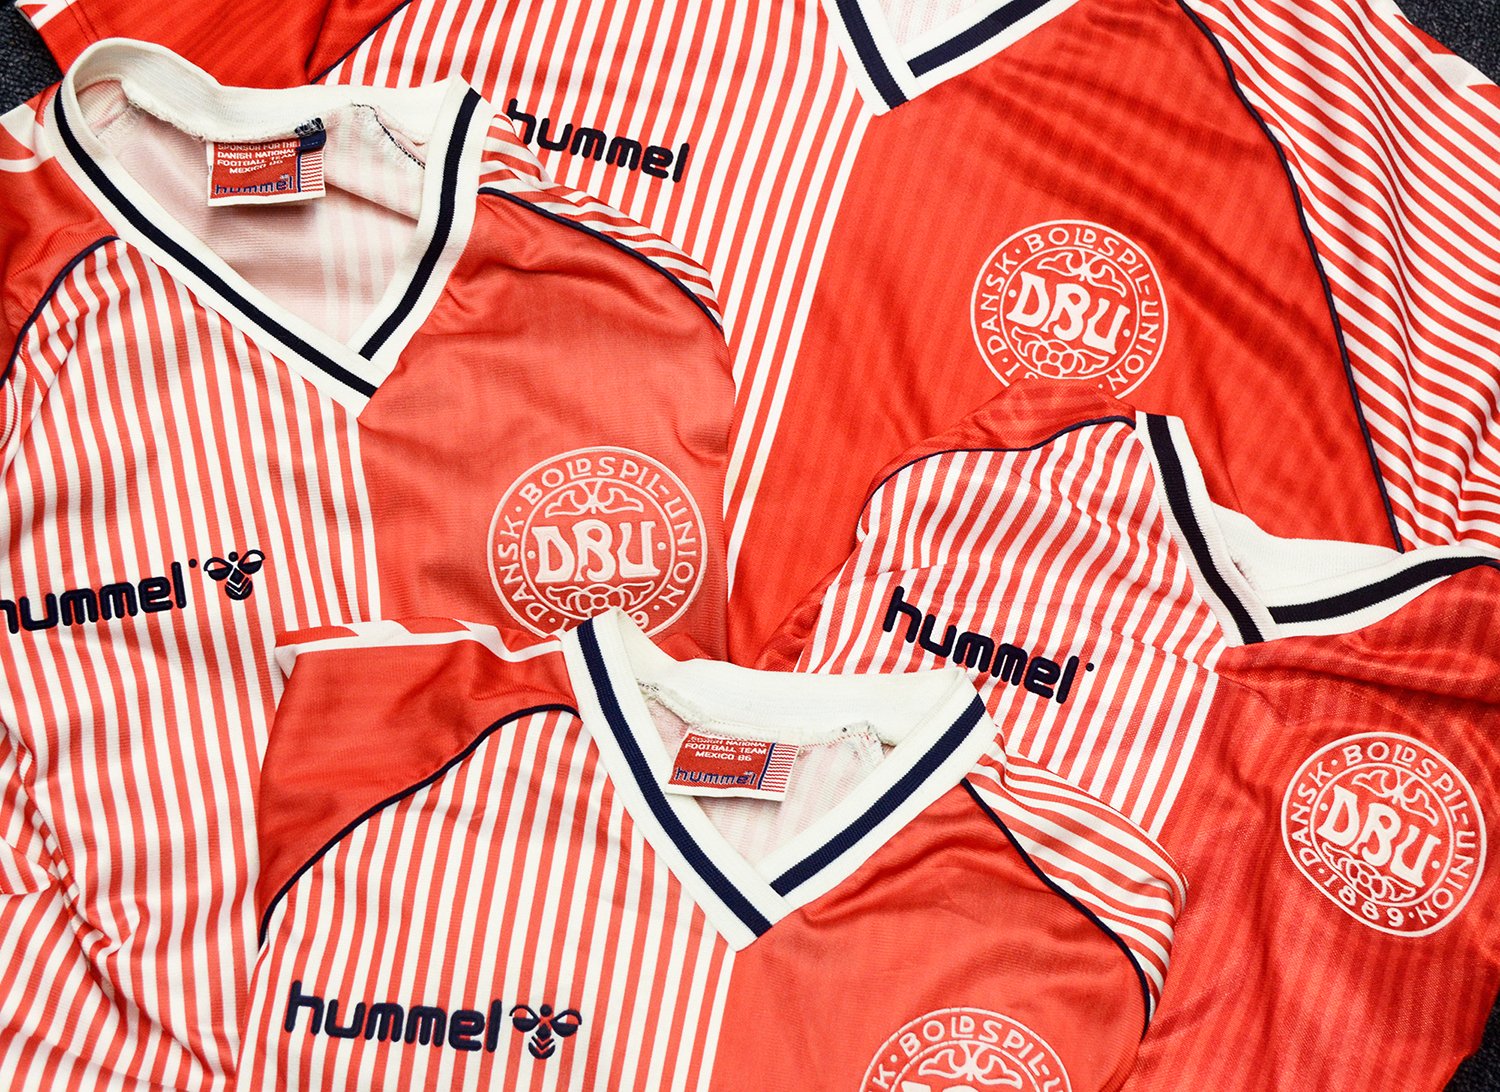 interferens I stor skala ros Classic Football Shirts on Twitter: "Some different versions of Hummel's  famous Denmark 1988 design Have a closer look here -  https://t.co/6mHGwni5yb https://t.co/SXrYiElhWZ" / Twitter